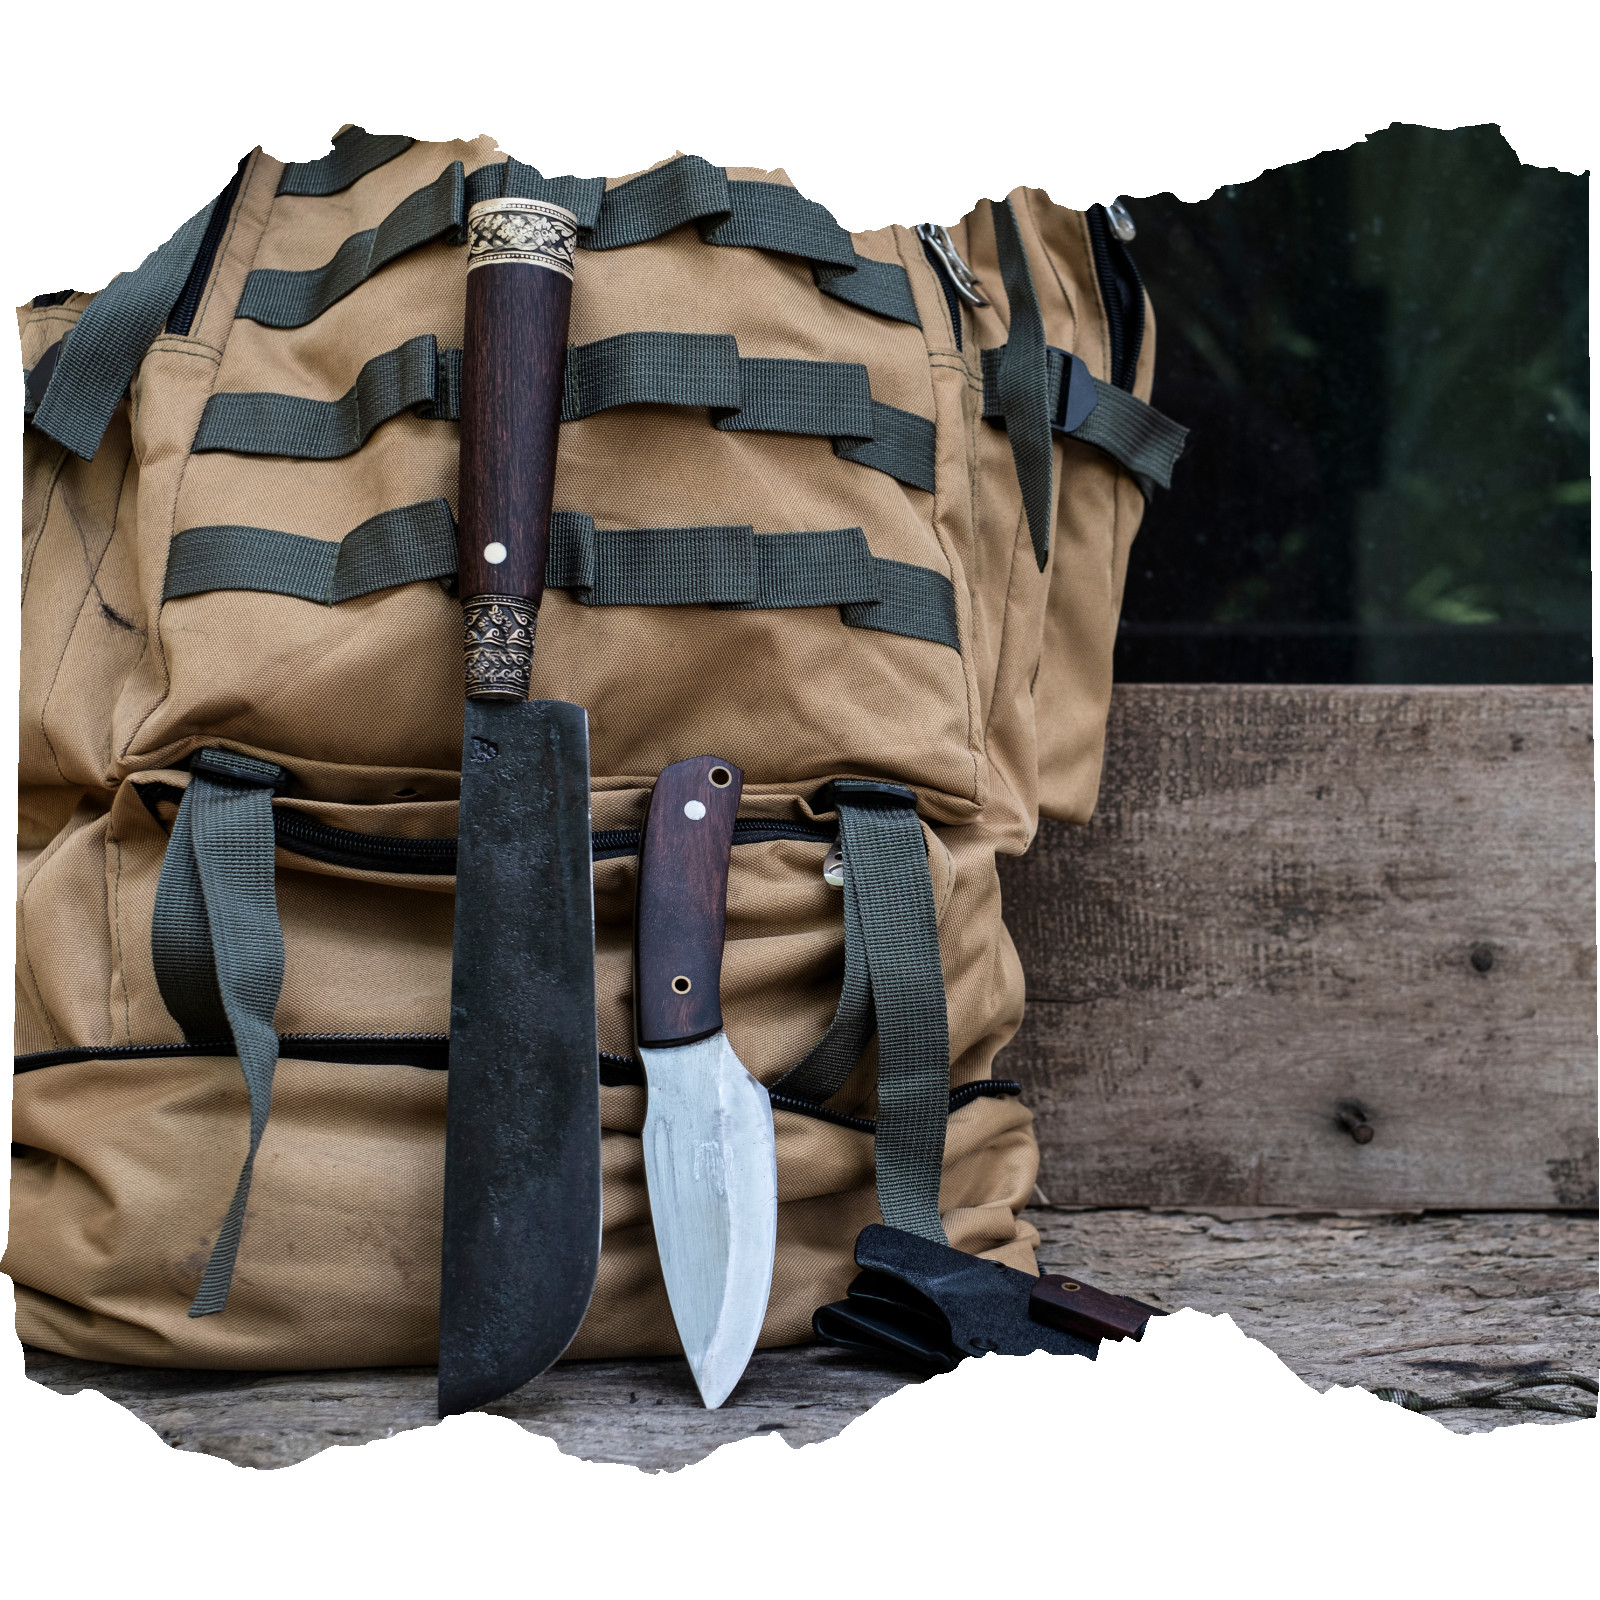 What is needed for a Bug Out Bag?